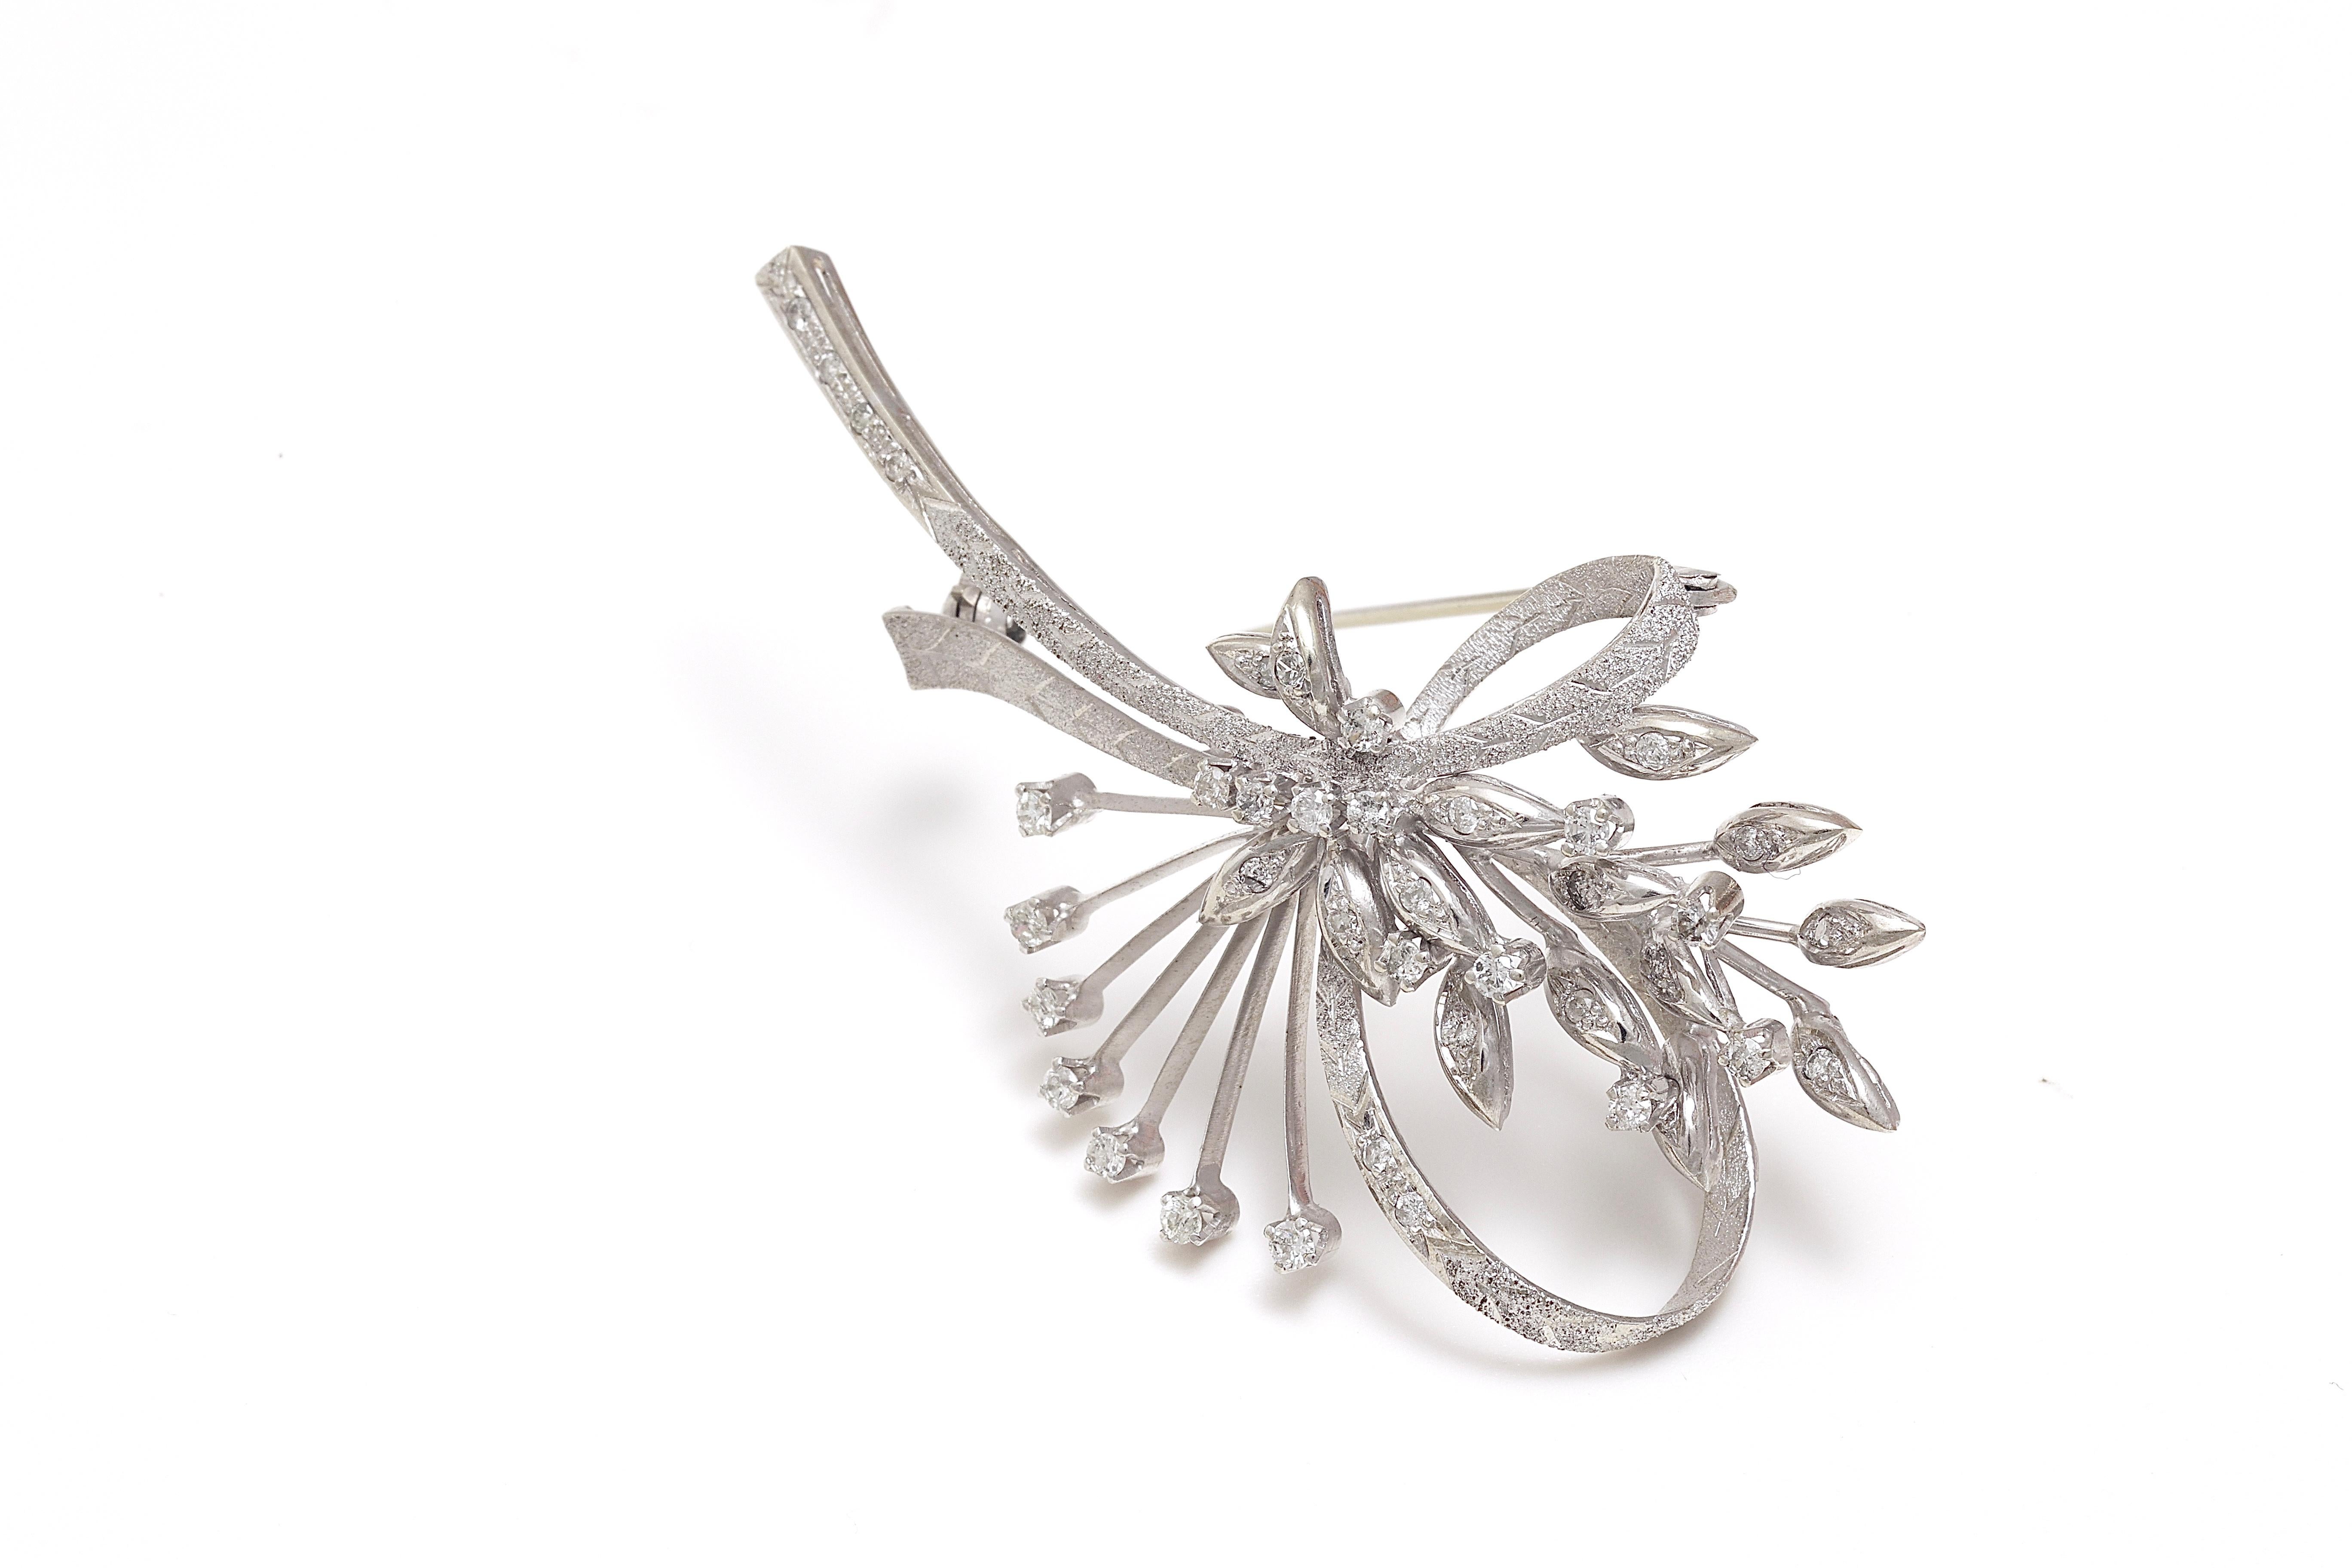  18 kt. White Gold Brooch with 1.52 ct. Brilliant Cut Diamonds For Sale 3